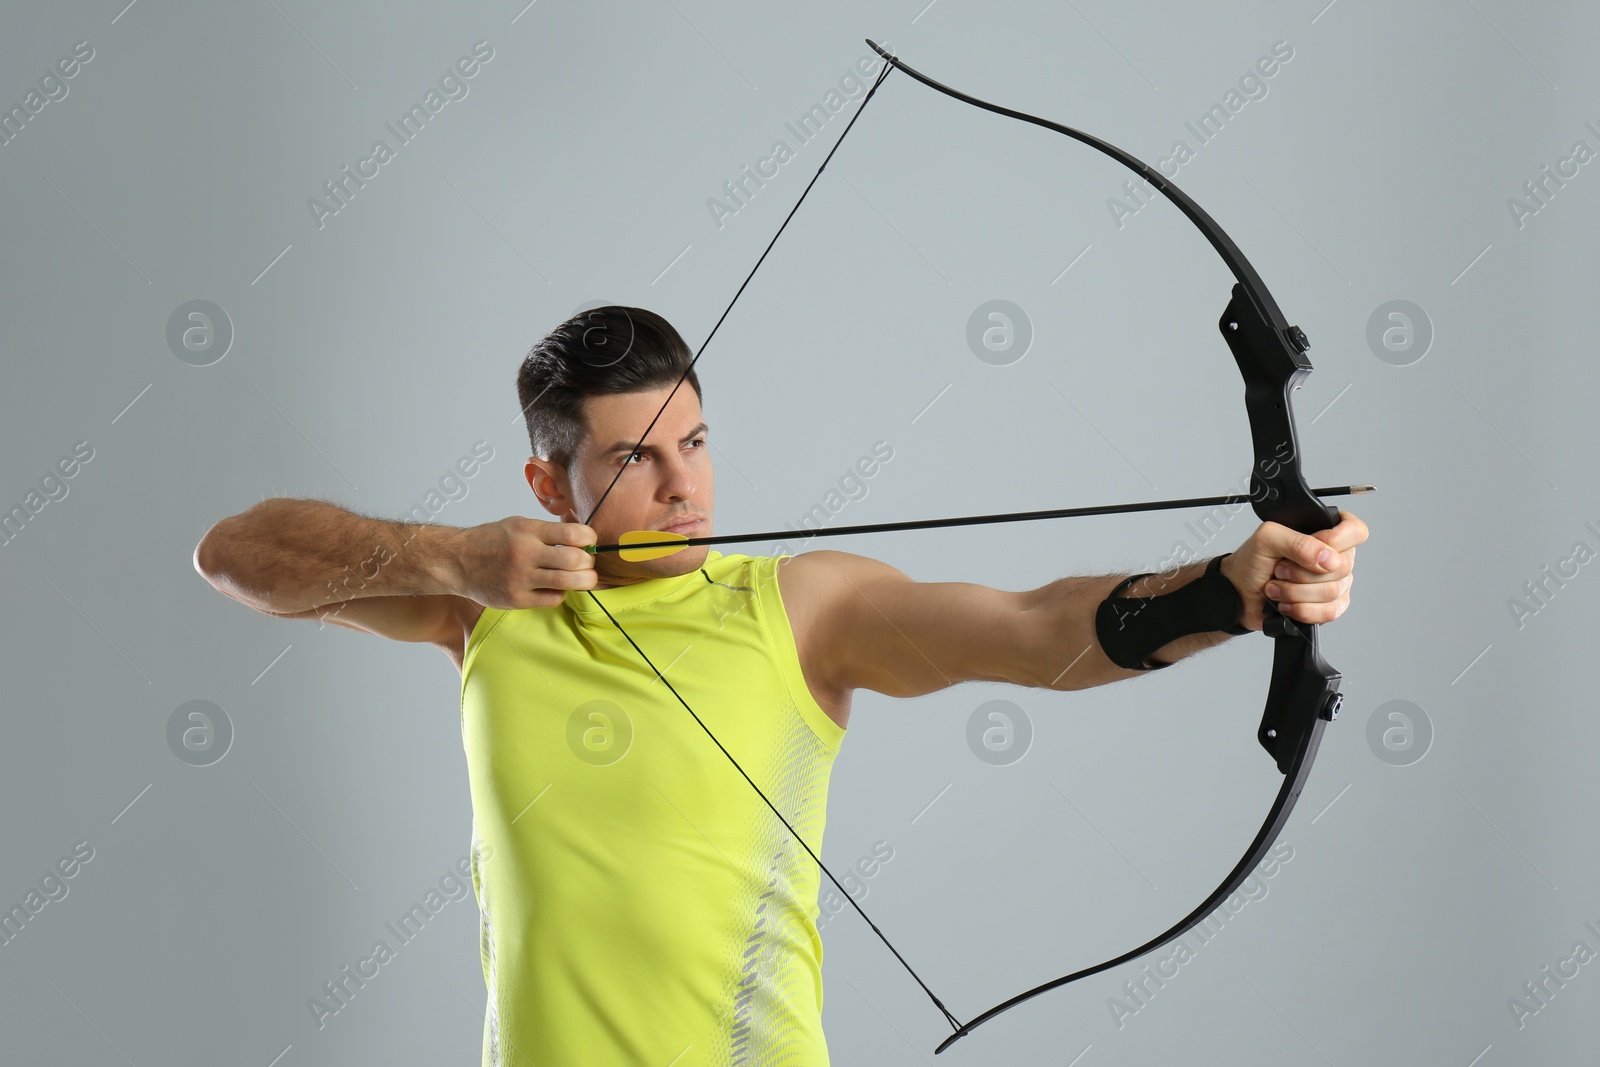 Photo of Man with bow and arrow practicing archery on light grey background